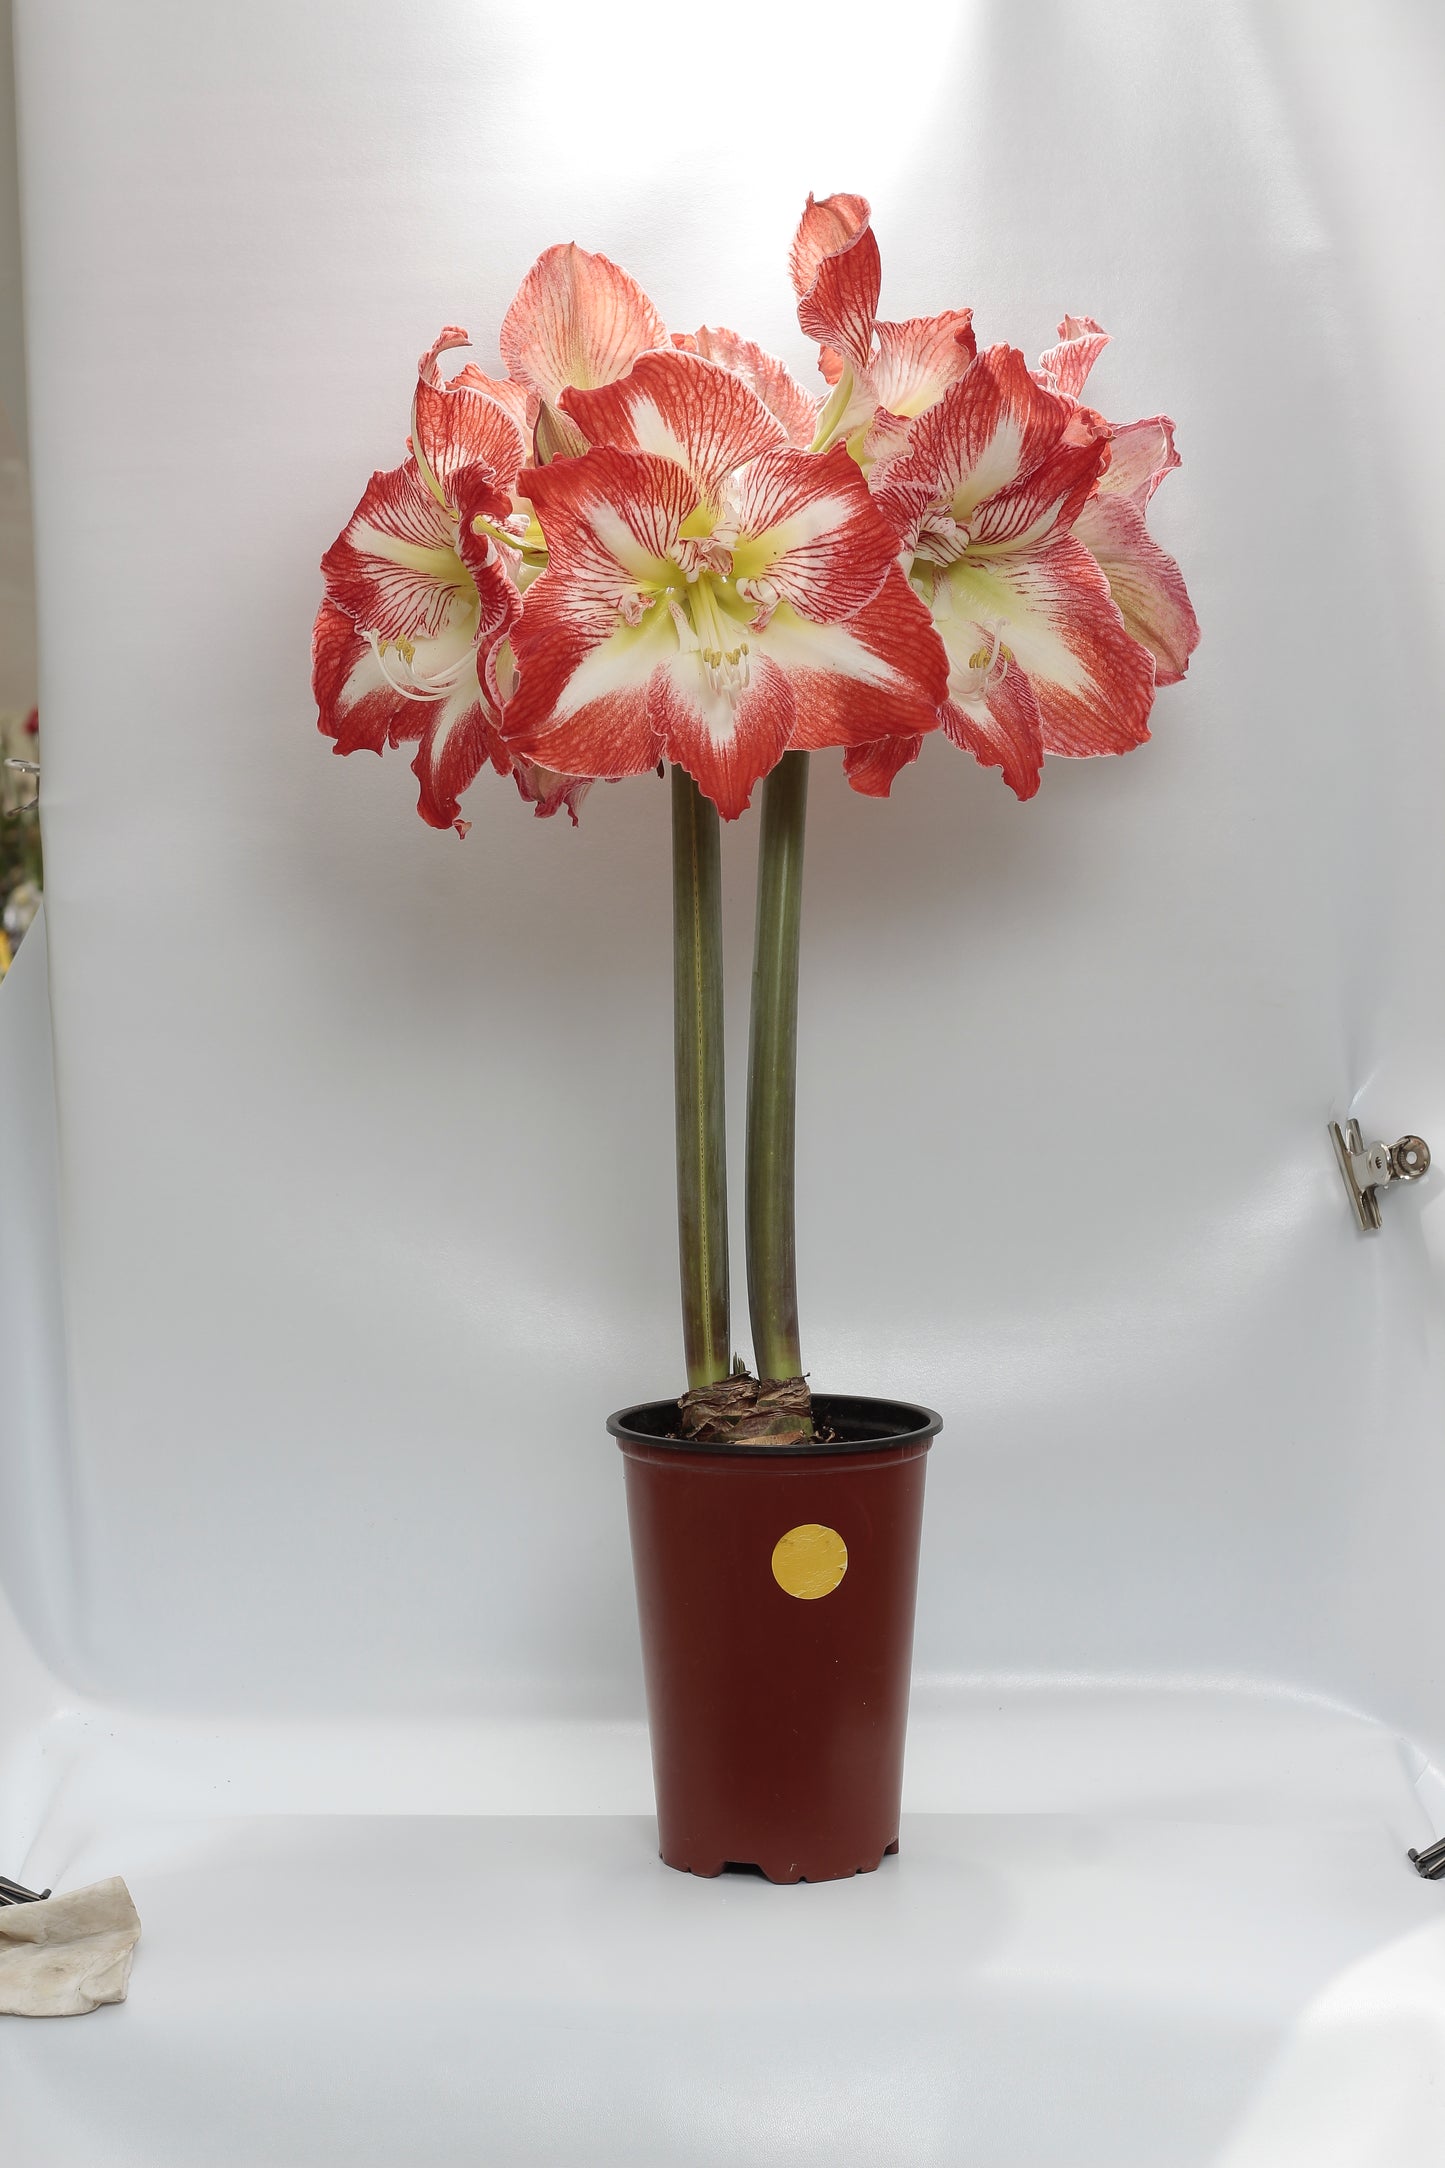 Load image into Gallery viewer, Amaryllis Bulbs
